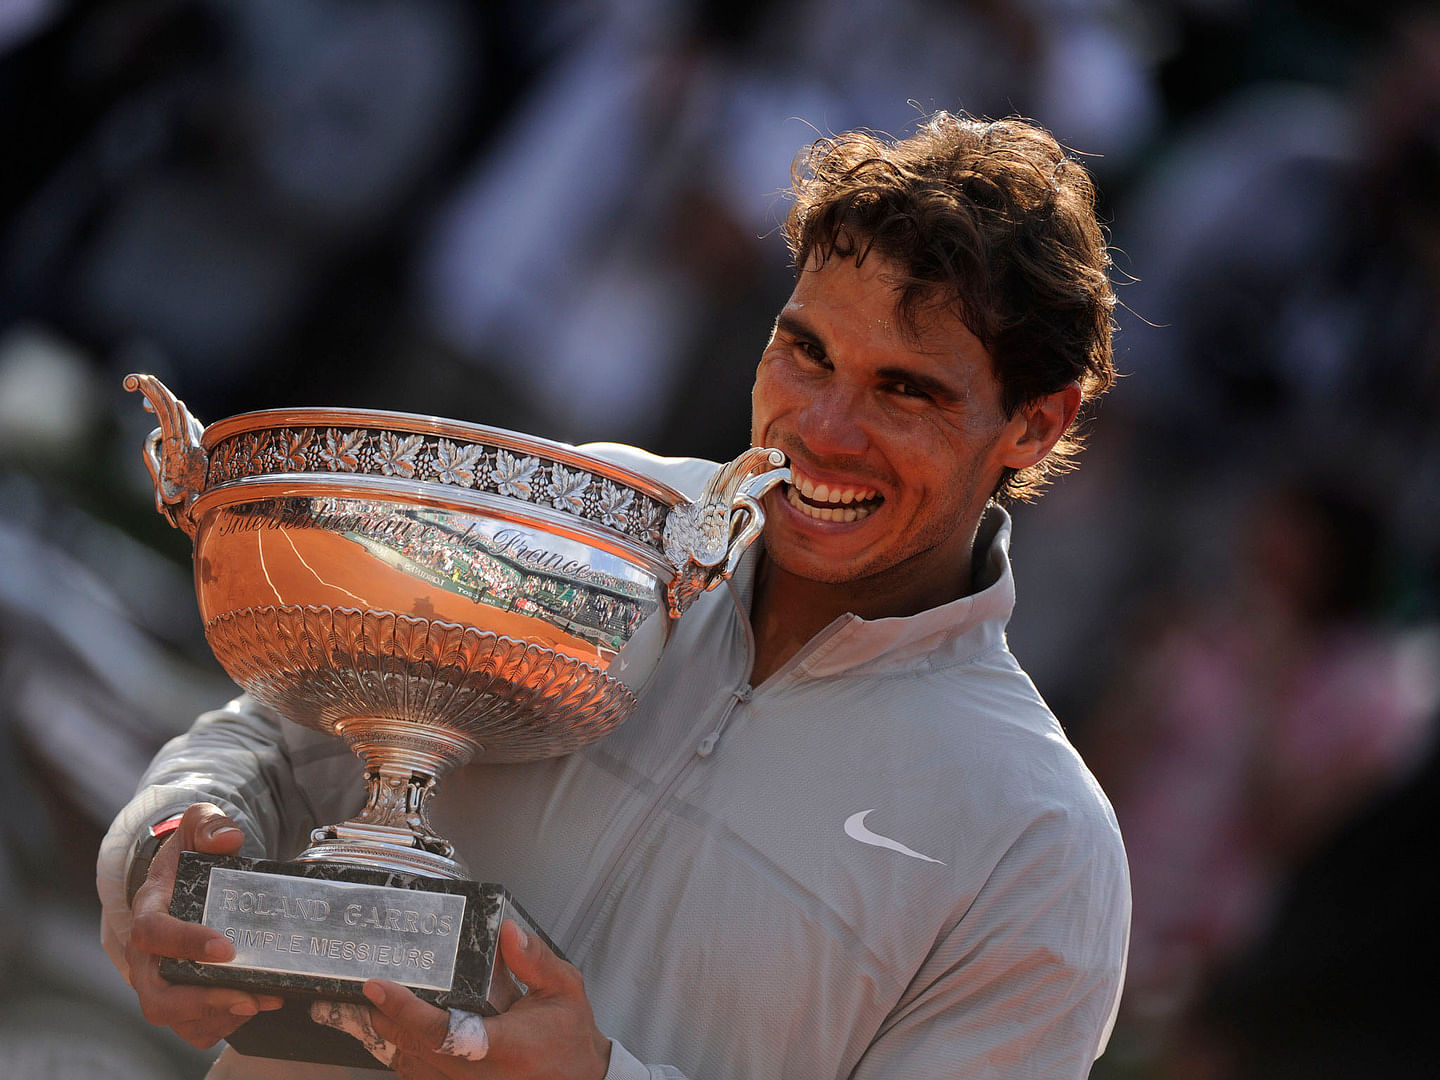 Is Rafael Nadal the greatest tennis player ever?